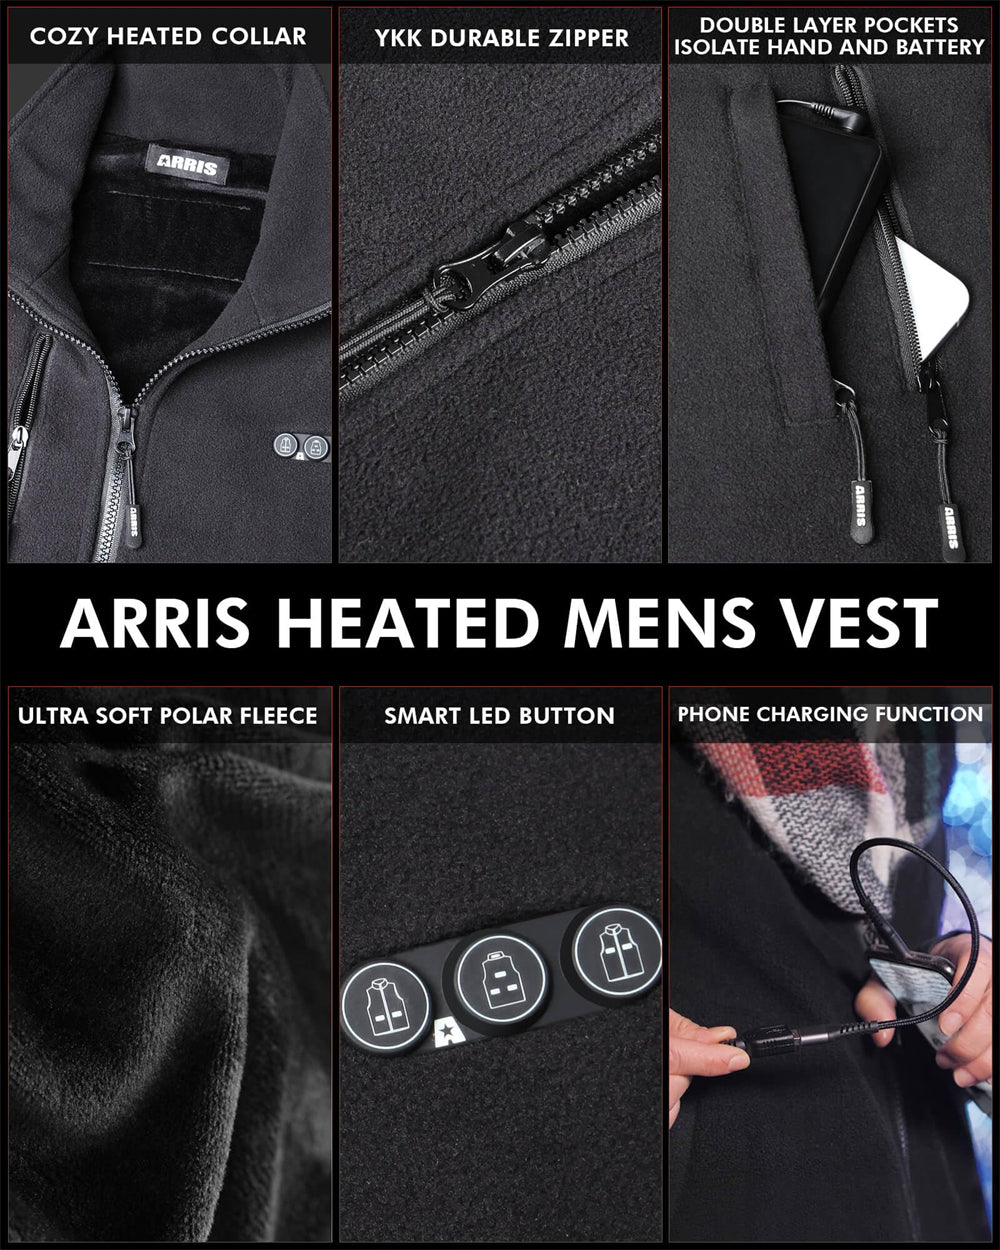 ultra soft polar fleece material and smart led button of the heated vest